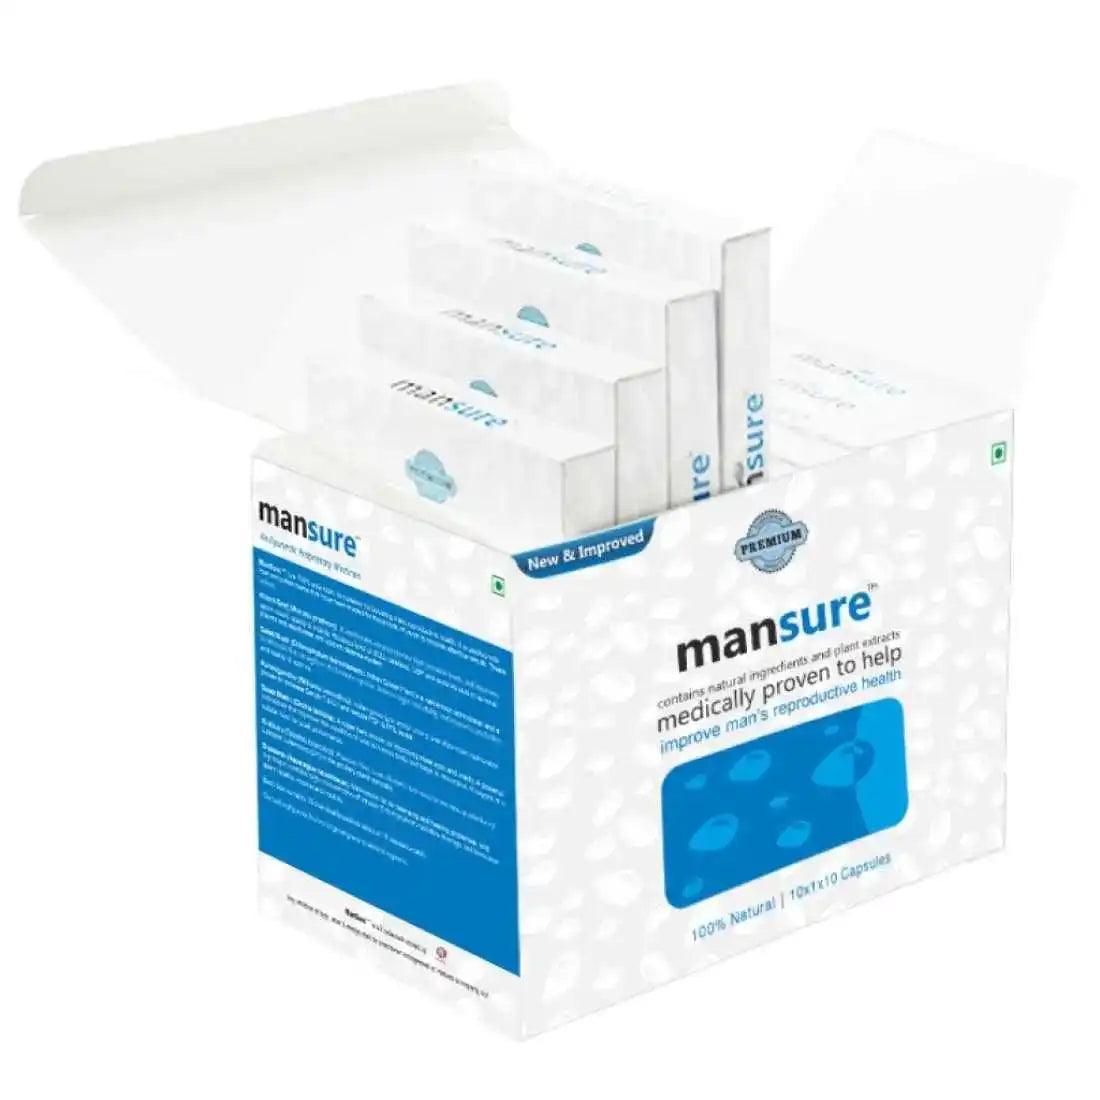 Buy 1 Pack ManSure Reproductive Health Supplement for men from everteen-neud.com